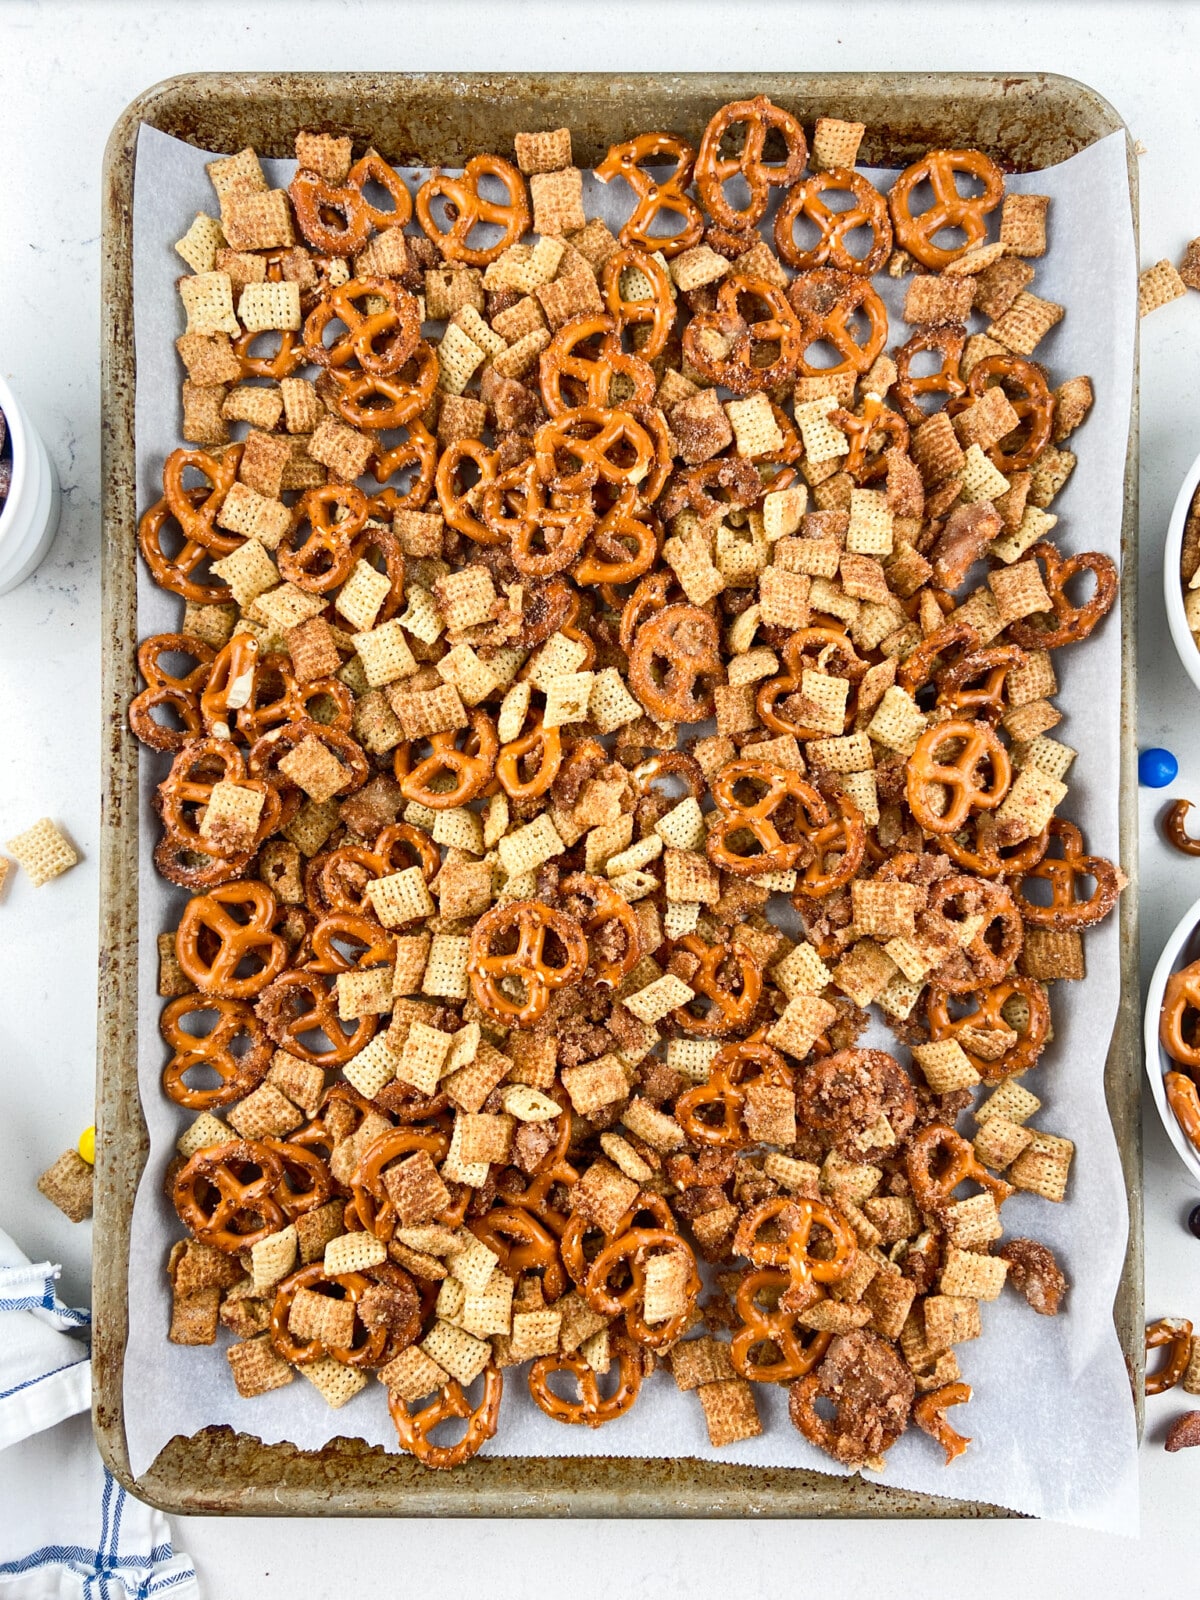 Tray of snack mix on cookie sheet.